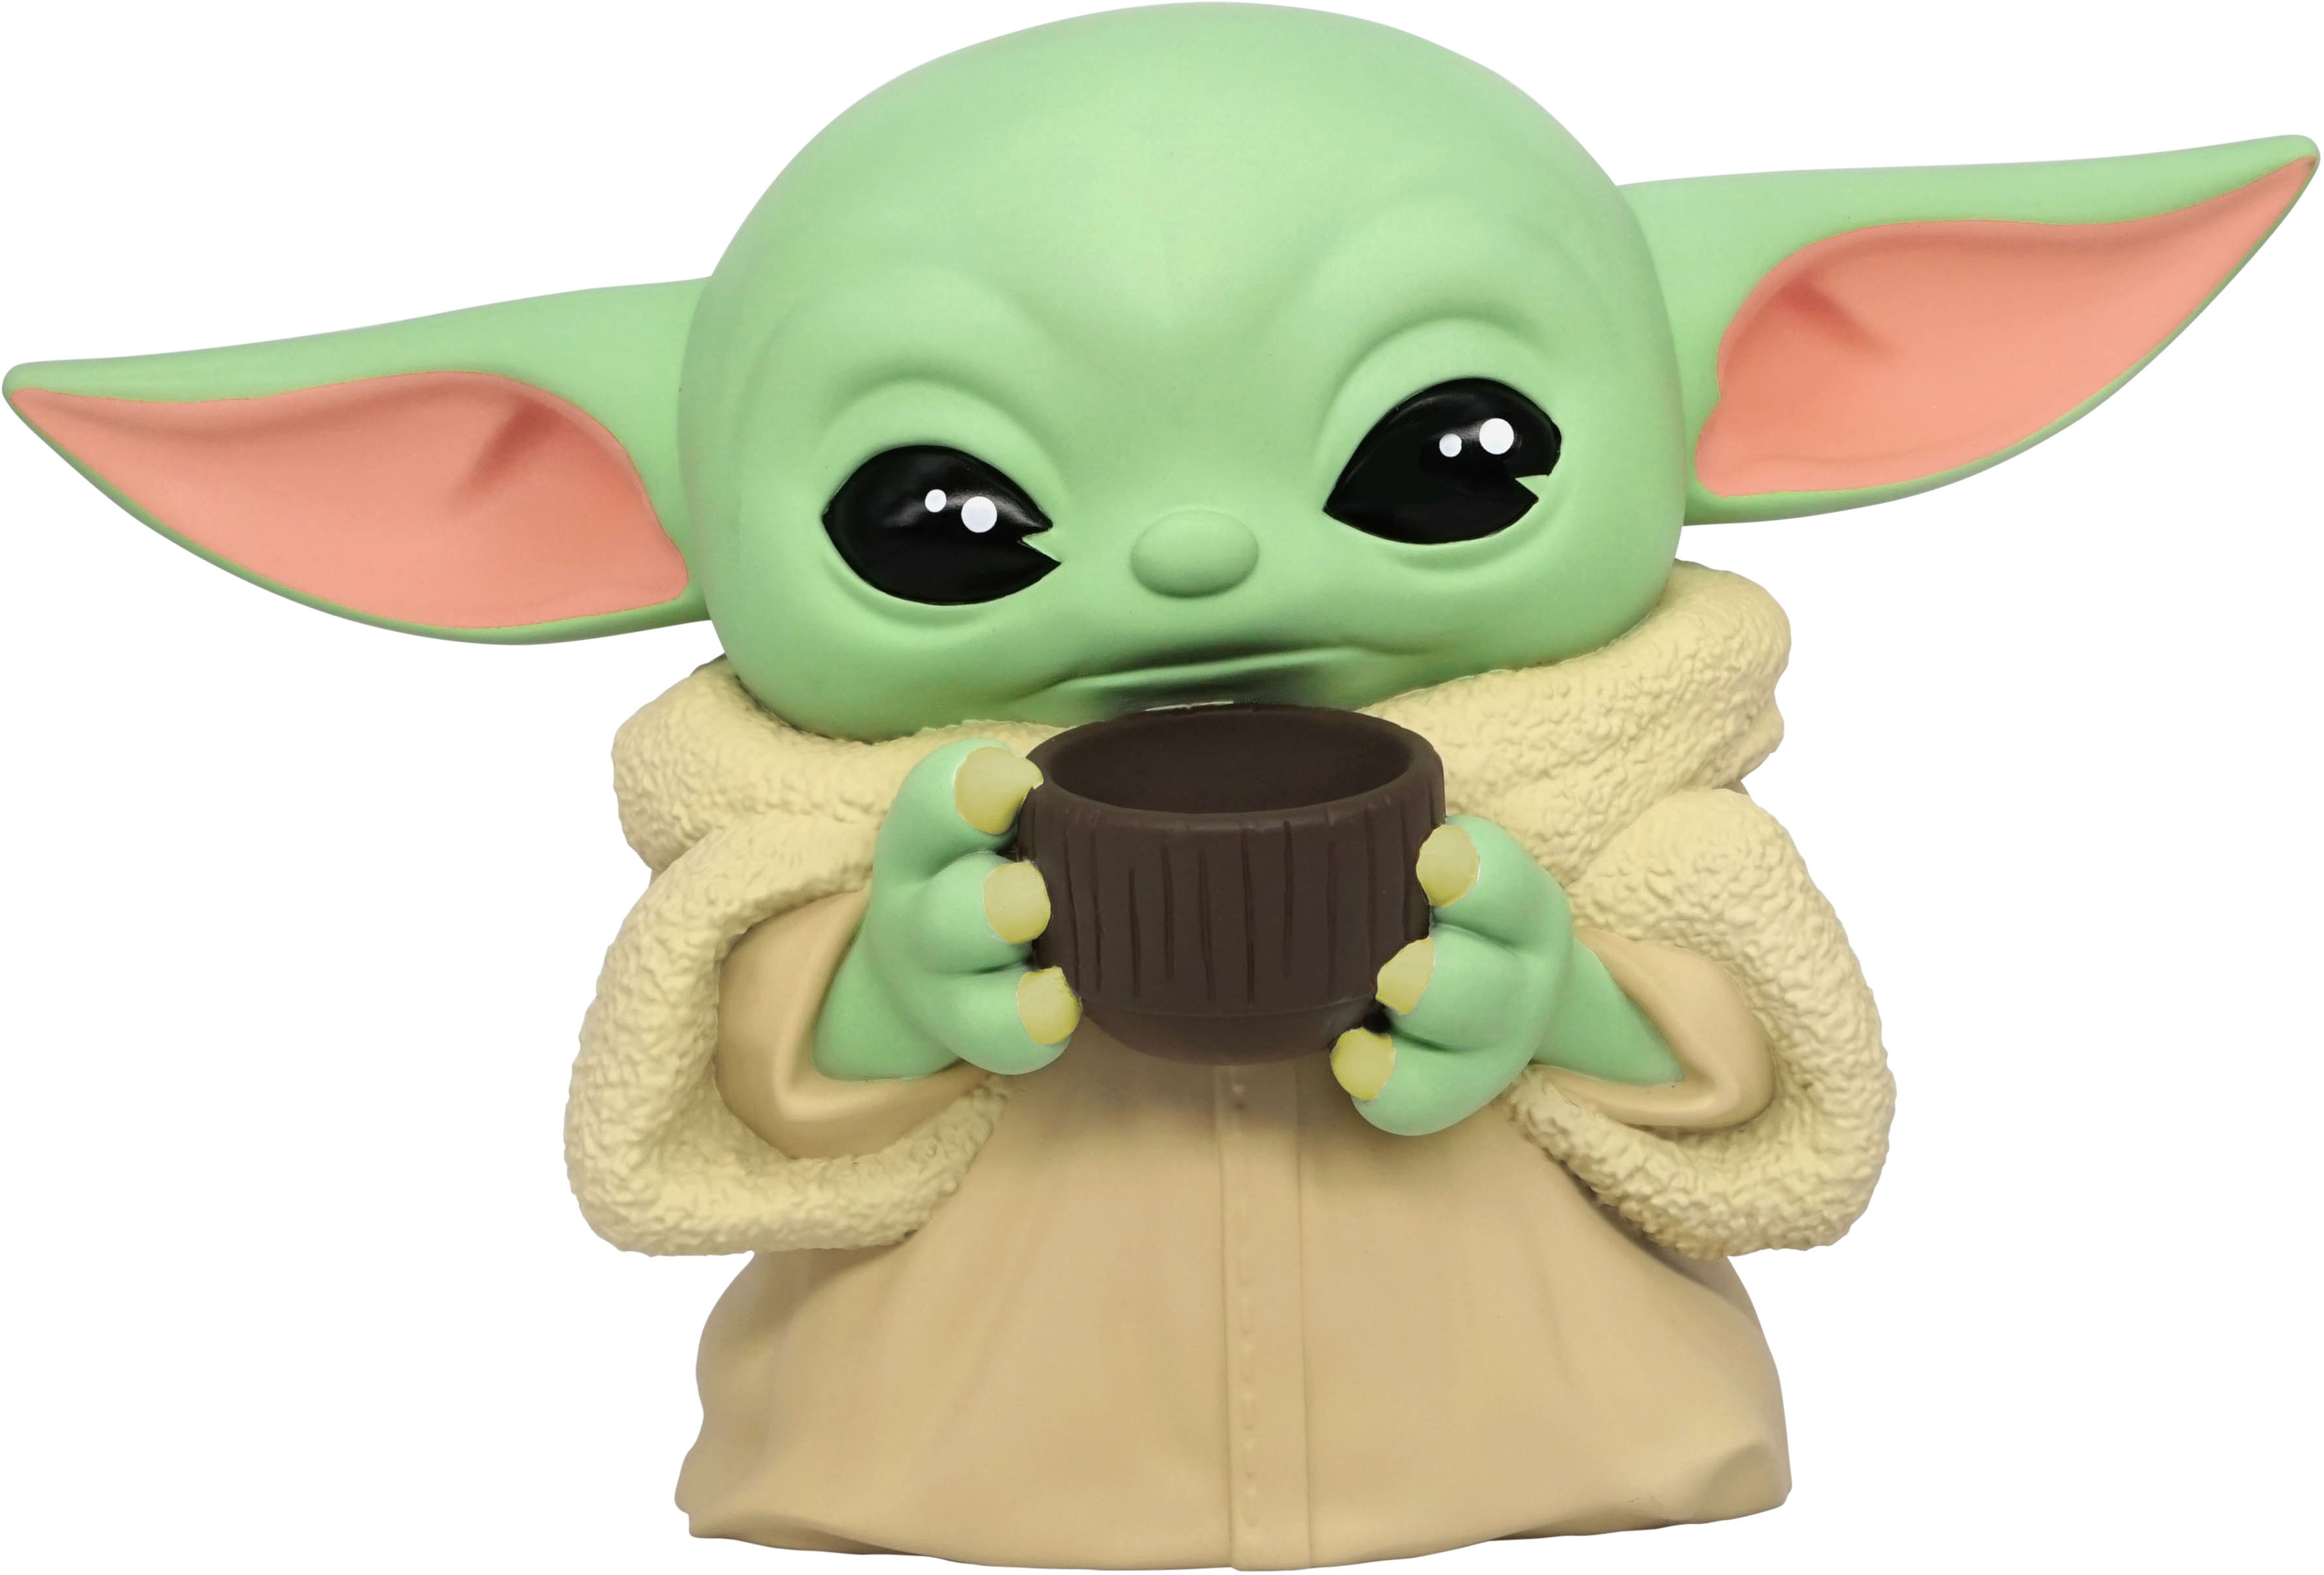 Baby Yoda - Where to Buy it at the Best Price in USA?